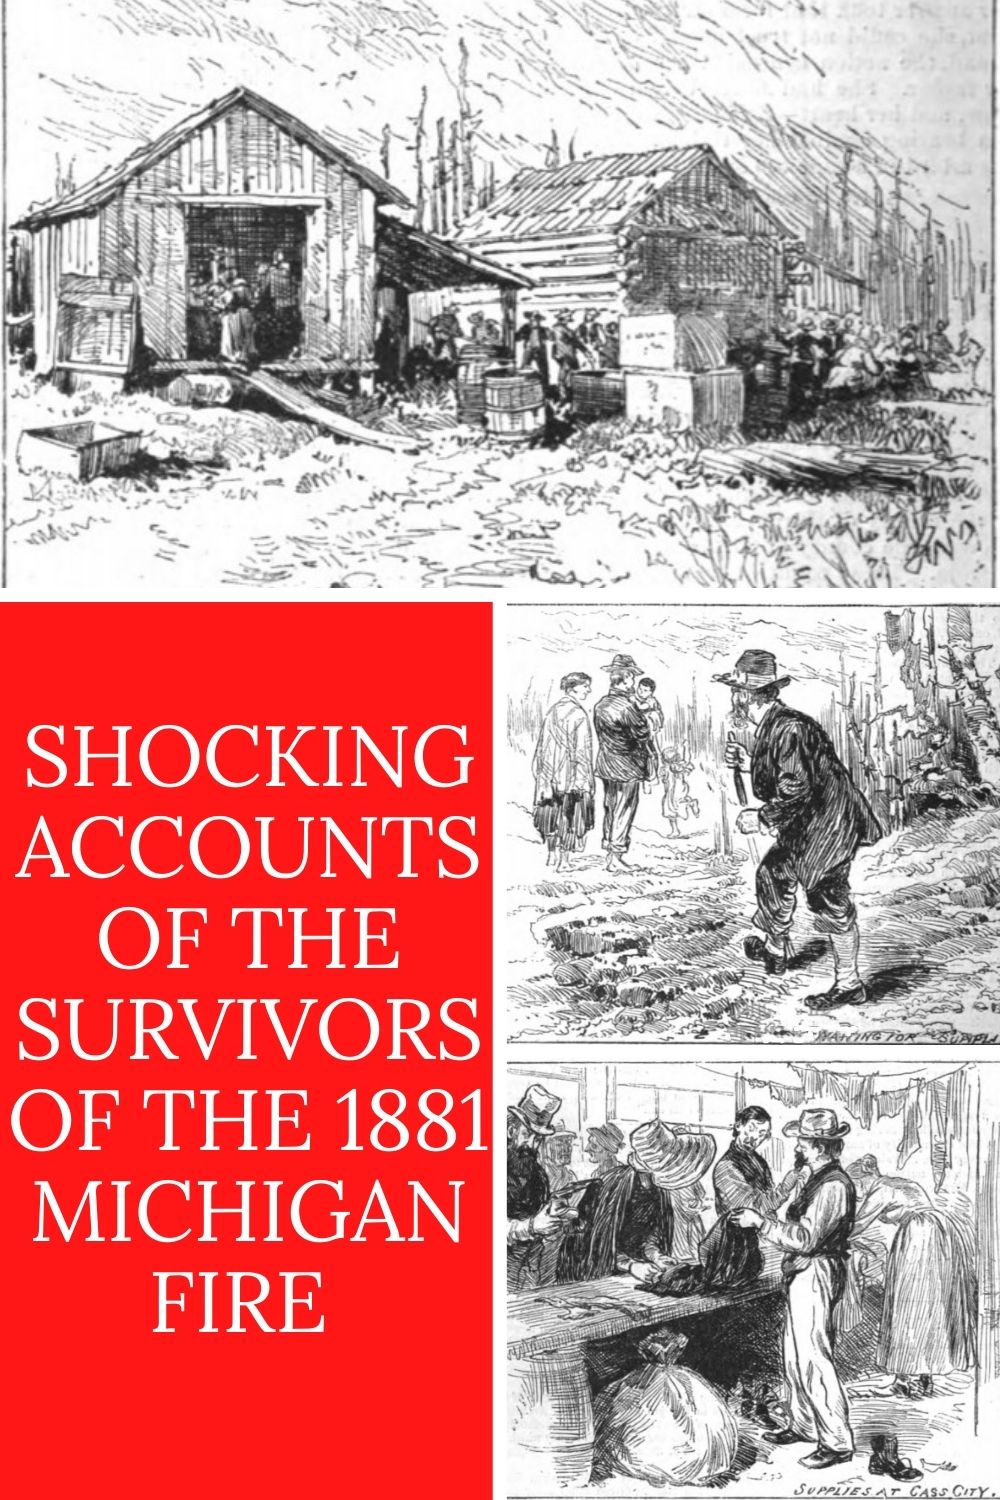 Shocking firsthand accounts of the Great Michigan Fire of 1881 from residents of Minden and Ubly. They were first published by the Minden Post soon after the fire and reprinted by many newspapers  nationally. These accounts have never been published online before. Courtesy of the Minden City Herald.
#PureMittenPride #MittenStateLove #Survival #Michigan #FindYourWild #OptOutside #GreatLakesState #PureMichigan #MichiganLove 